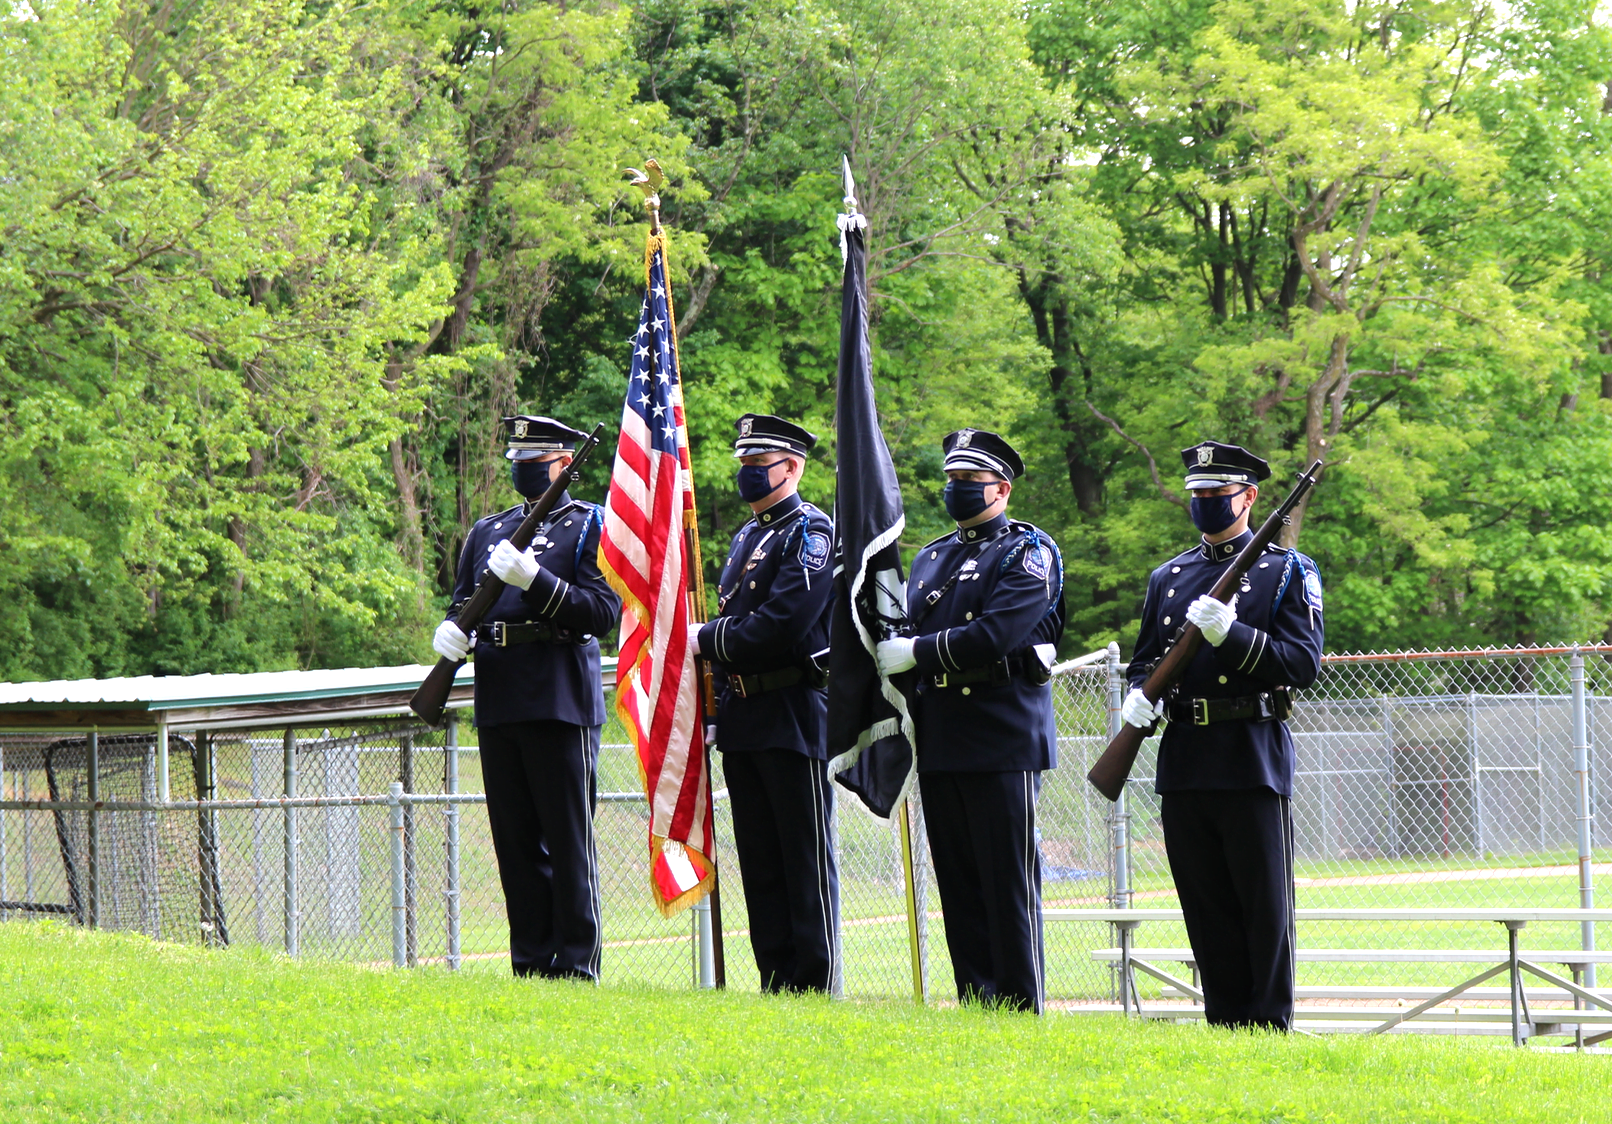 Greenwich Police Honor Guard at the Memorial Day ceremony at the former Byram School. May 25, 2020